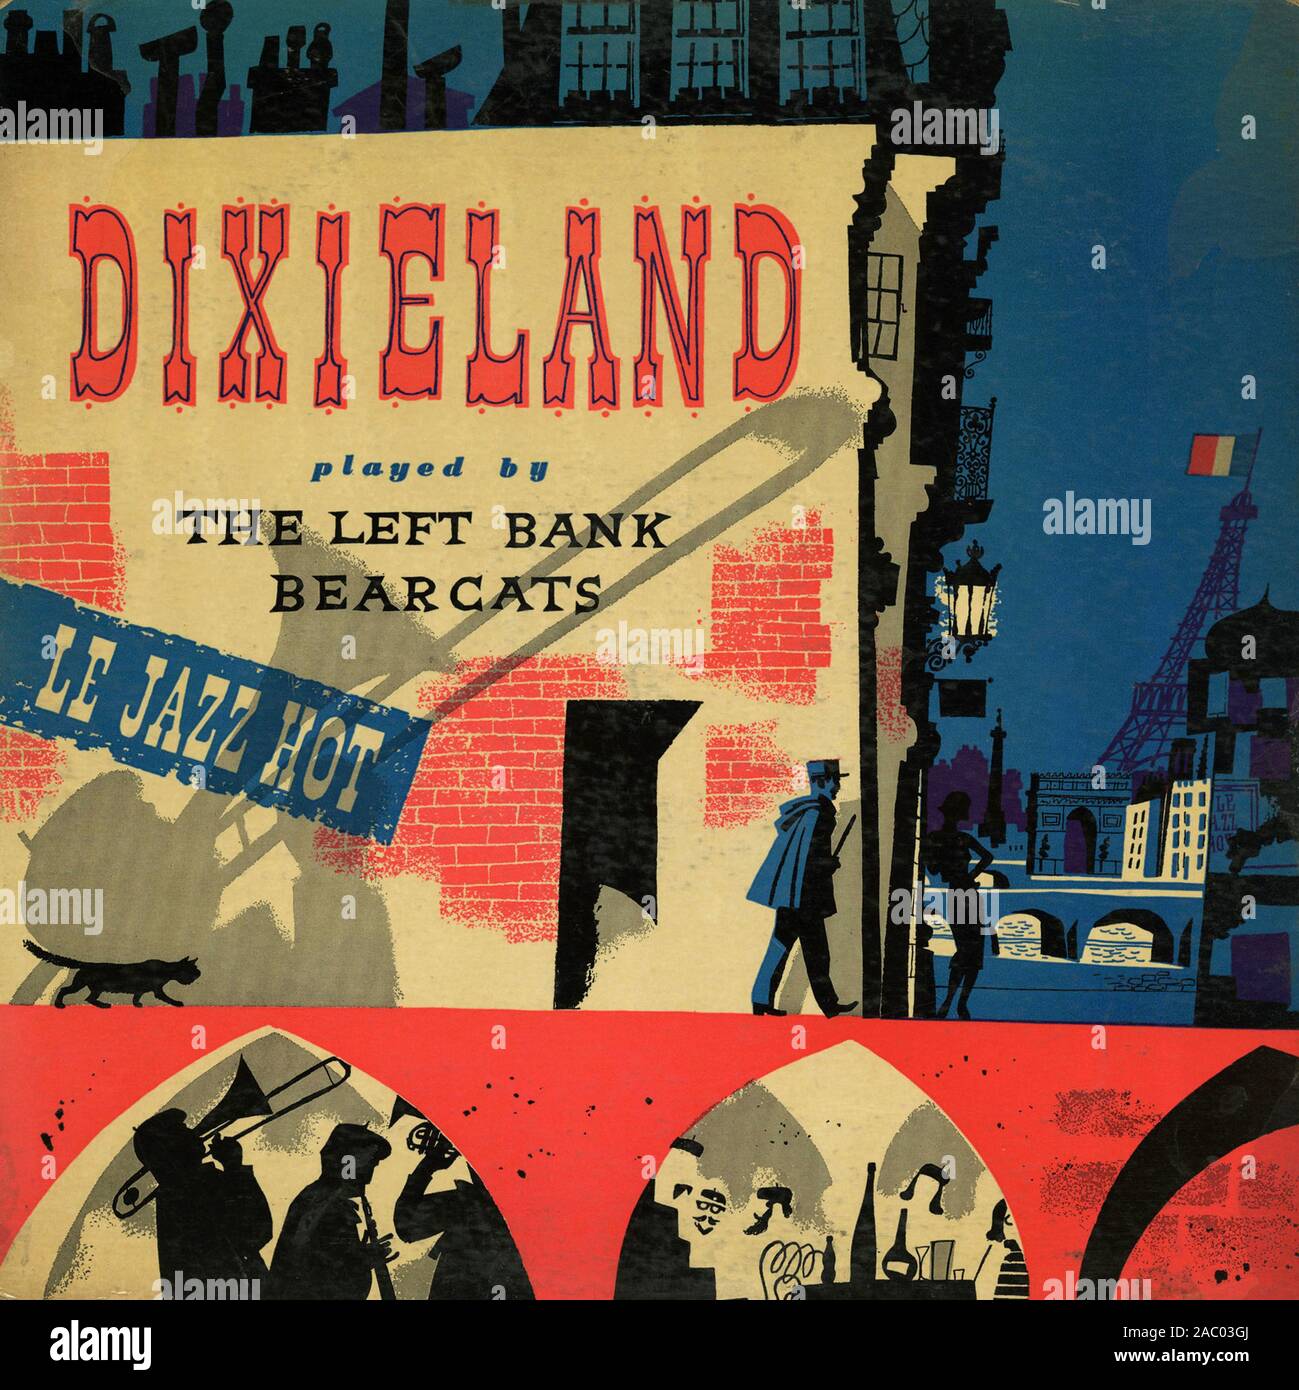 Dixieland played by The Left Bank Bearcats   - Vintage vinyl album cover Stock Photo